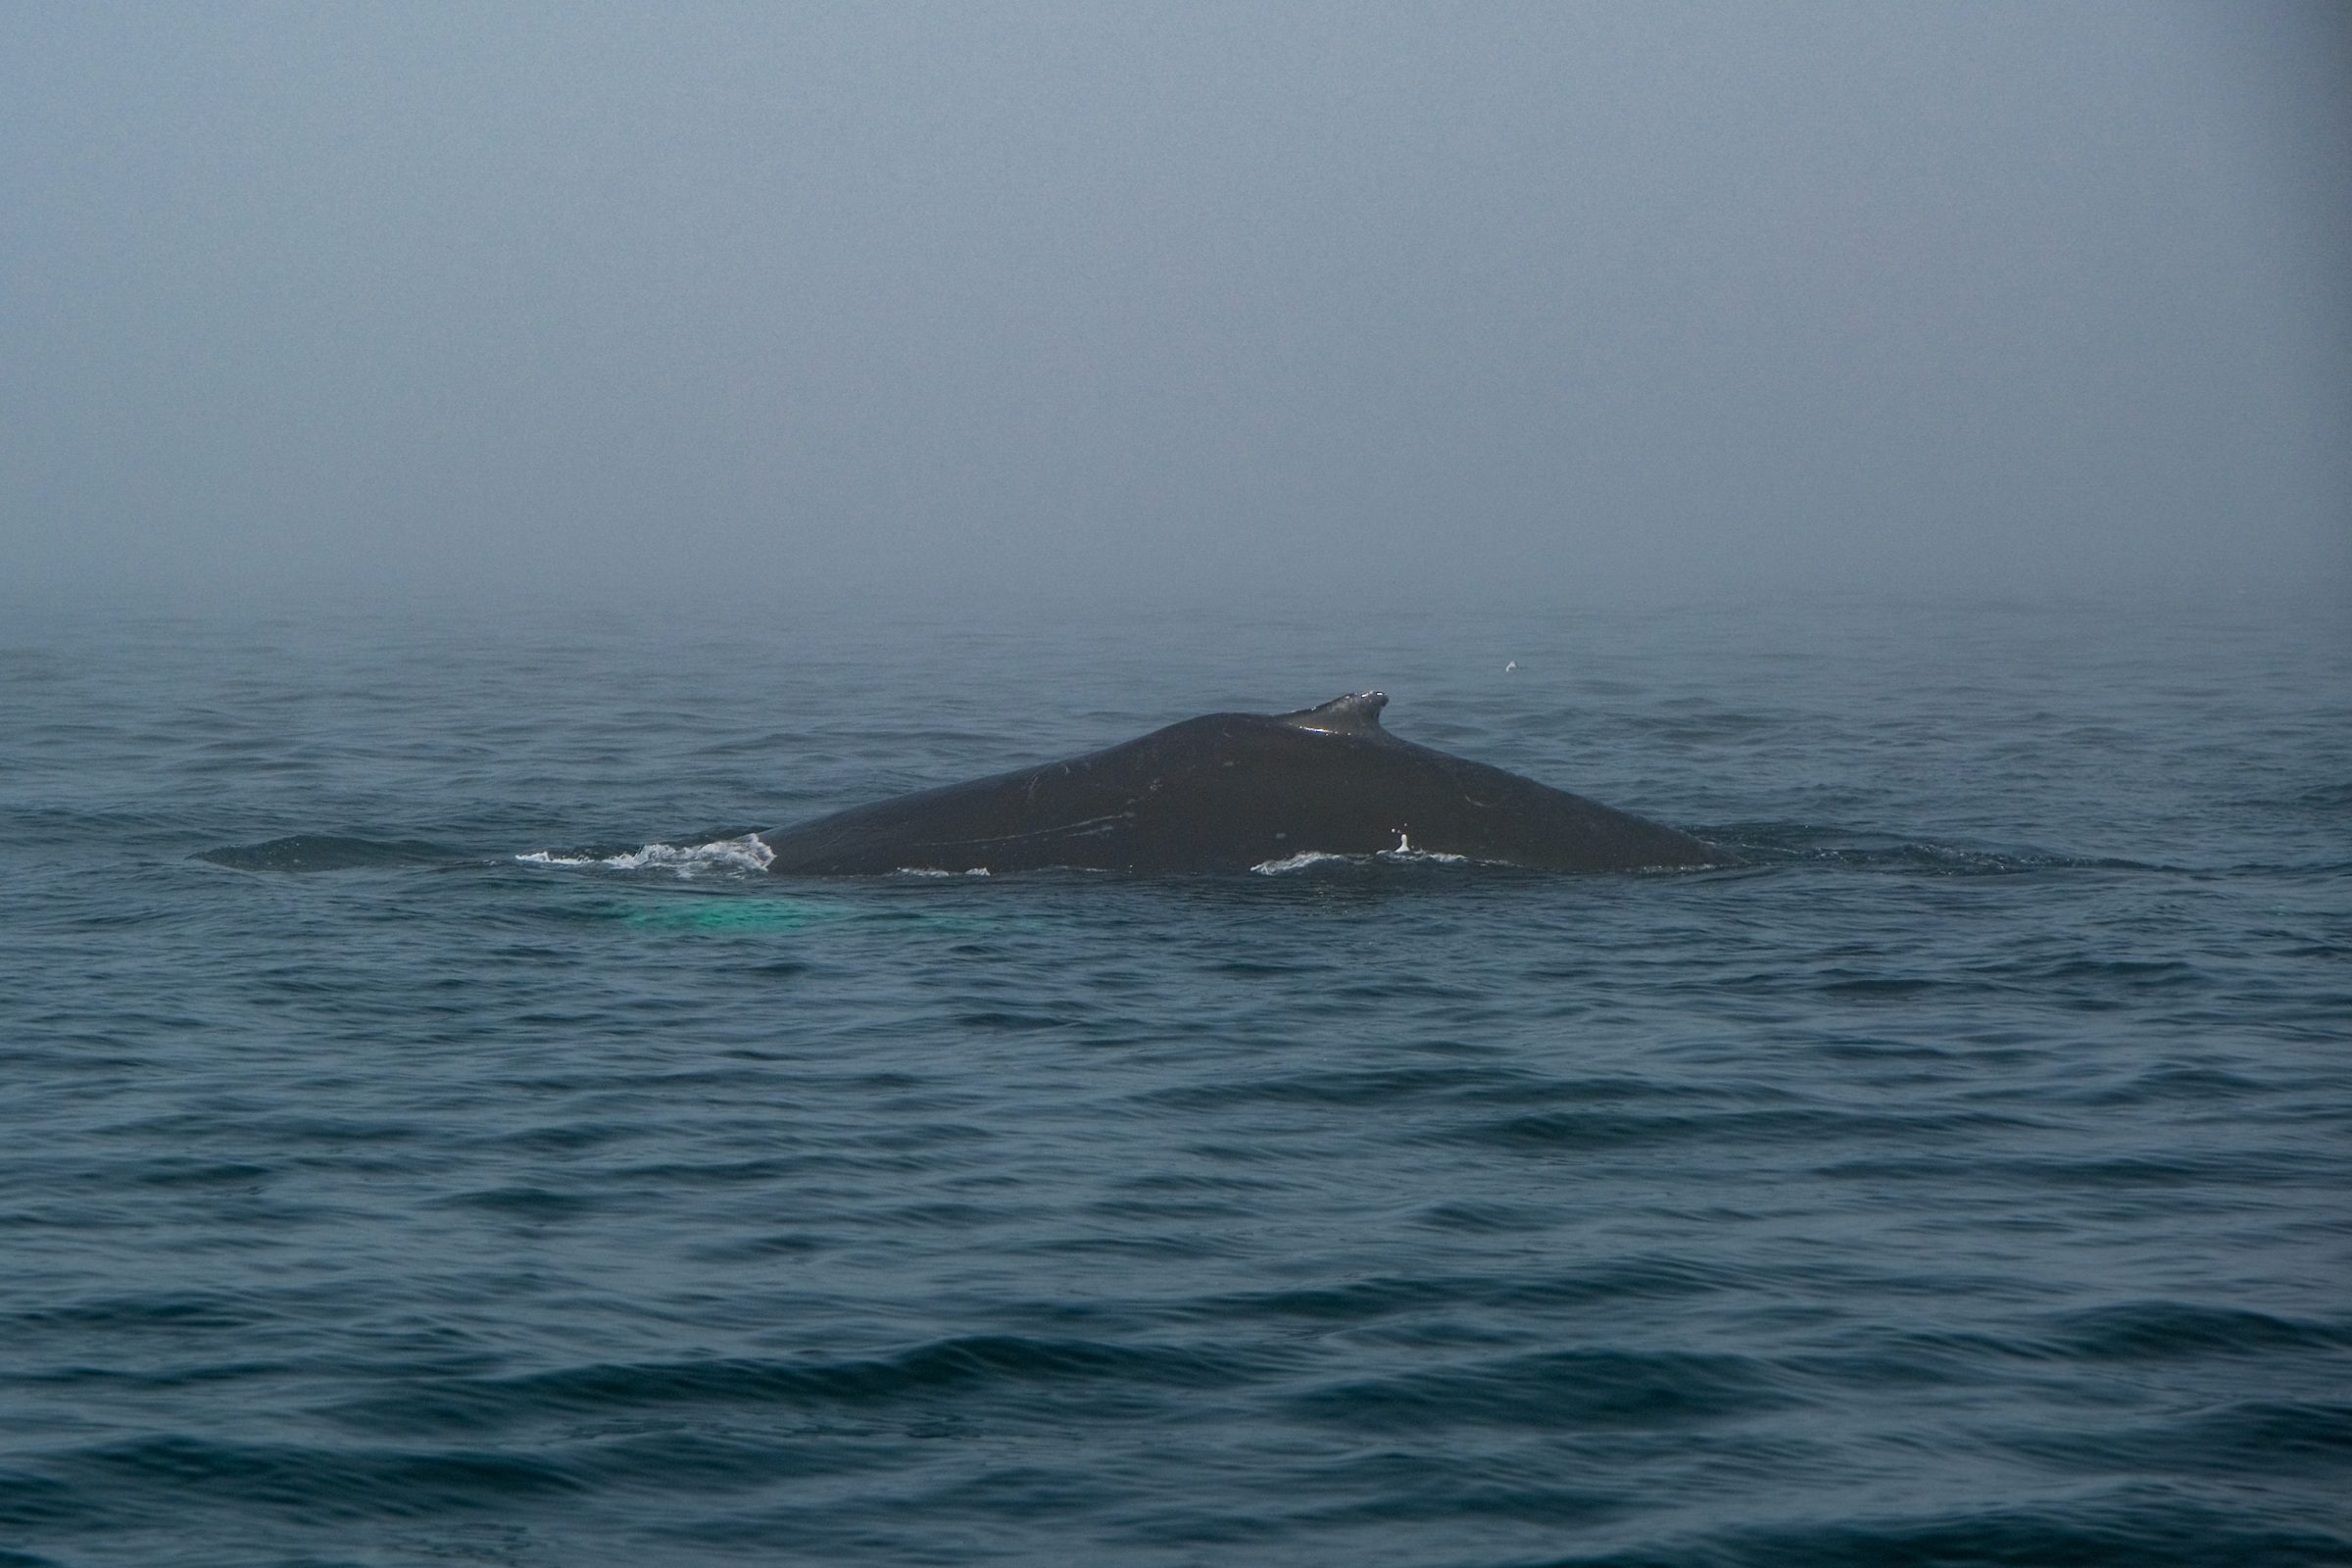 The humpback whale is going to take a deep dive, which can be seen from the curved back